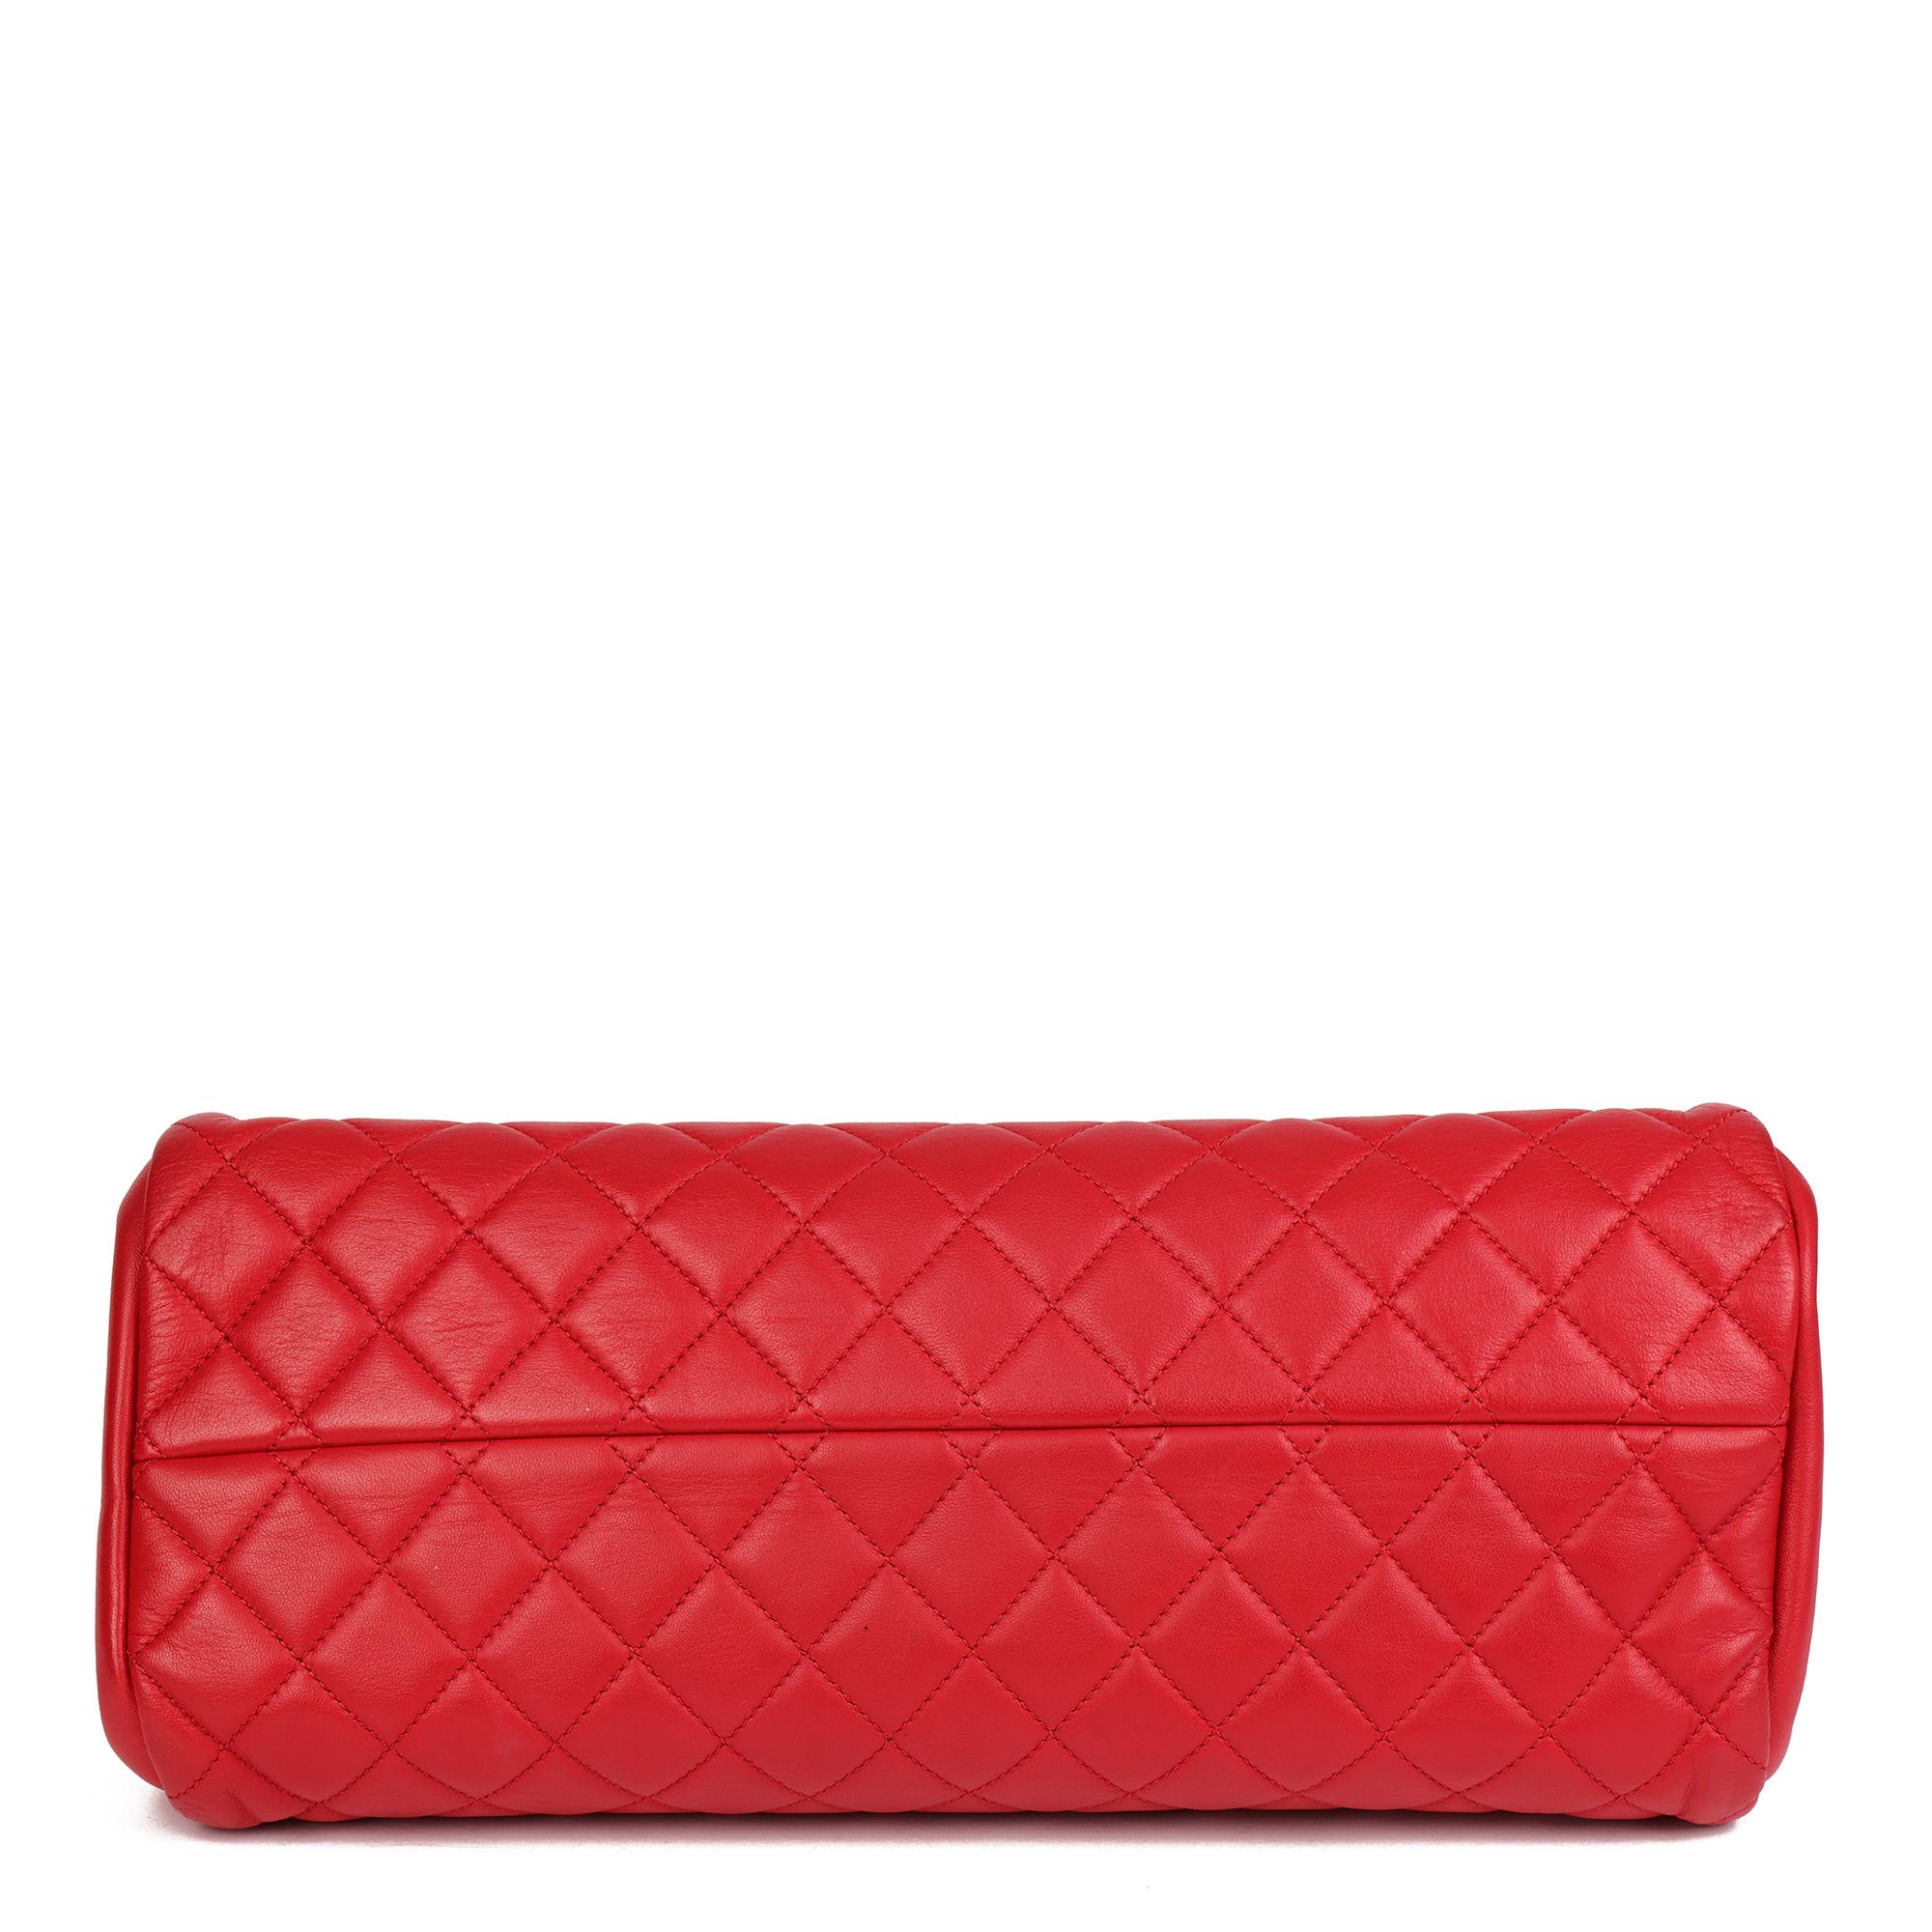 Women's CHANEL Red Quilted Lambskin Just Mademoiselle Bowling Bag